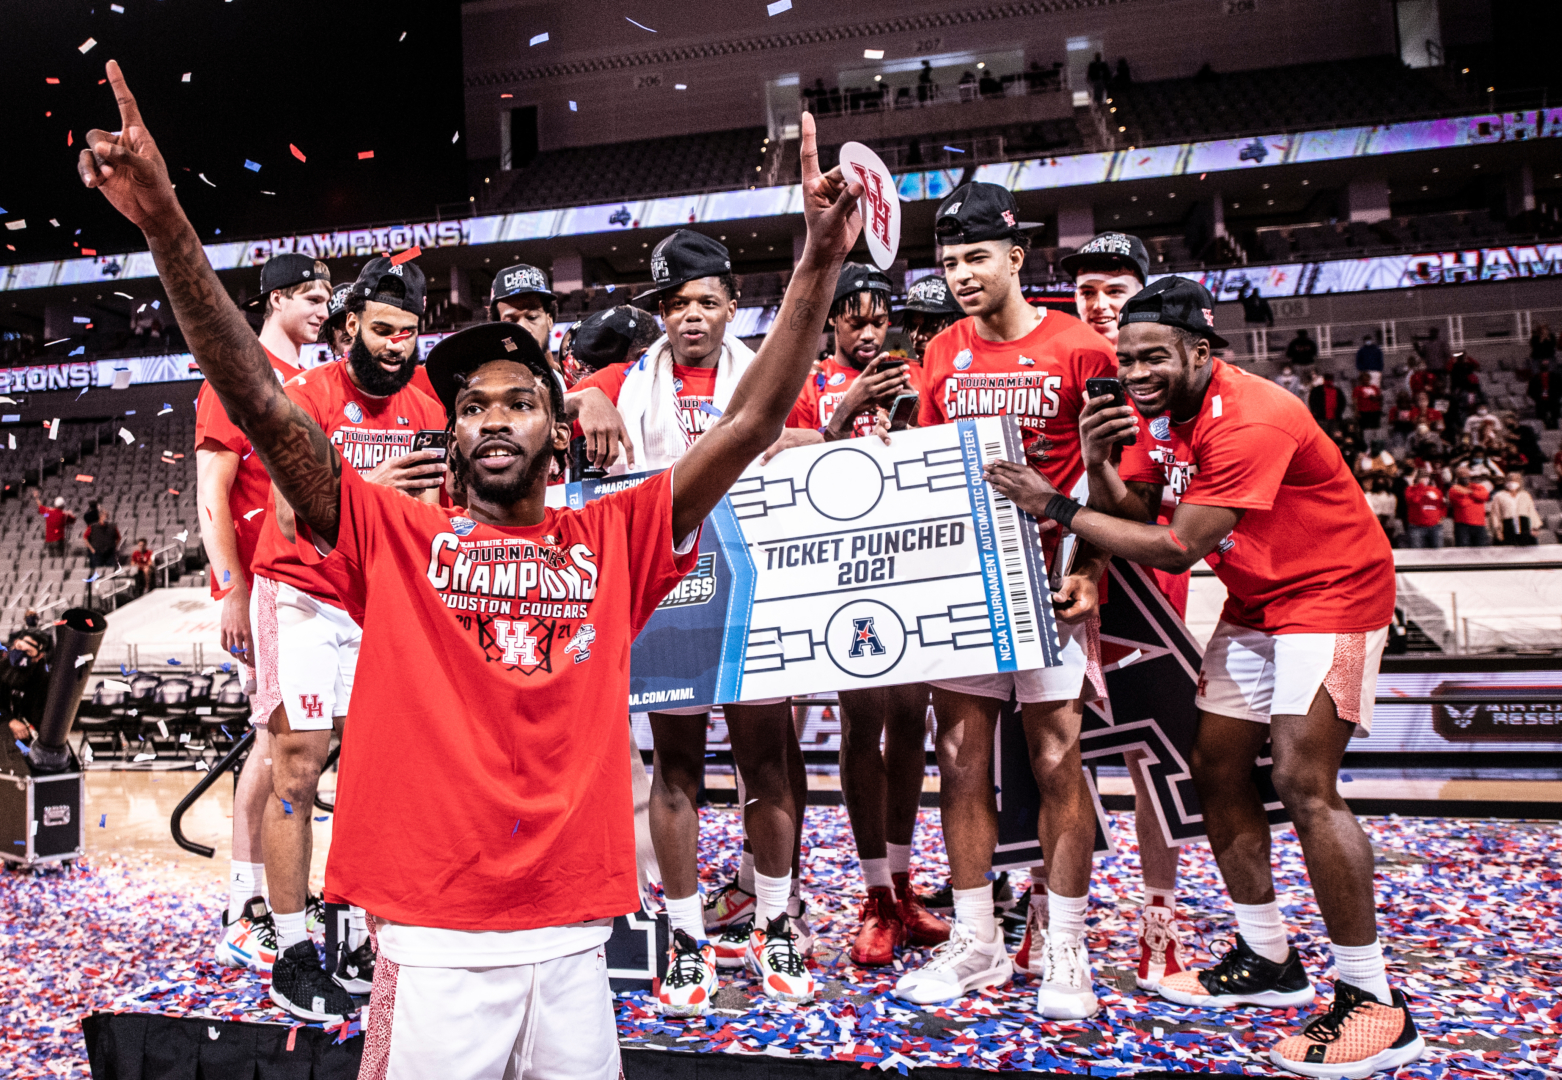 UH guard DeJon Jarreau raises his arms in celebration as the Cougars applaud their performance in winning the AAC Tournament. | Courtesy of UH athletics